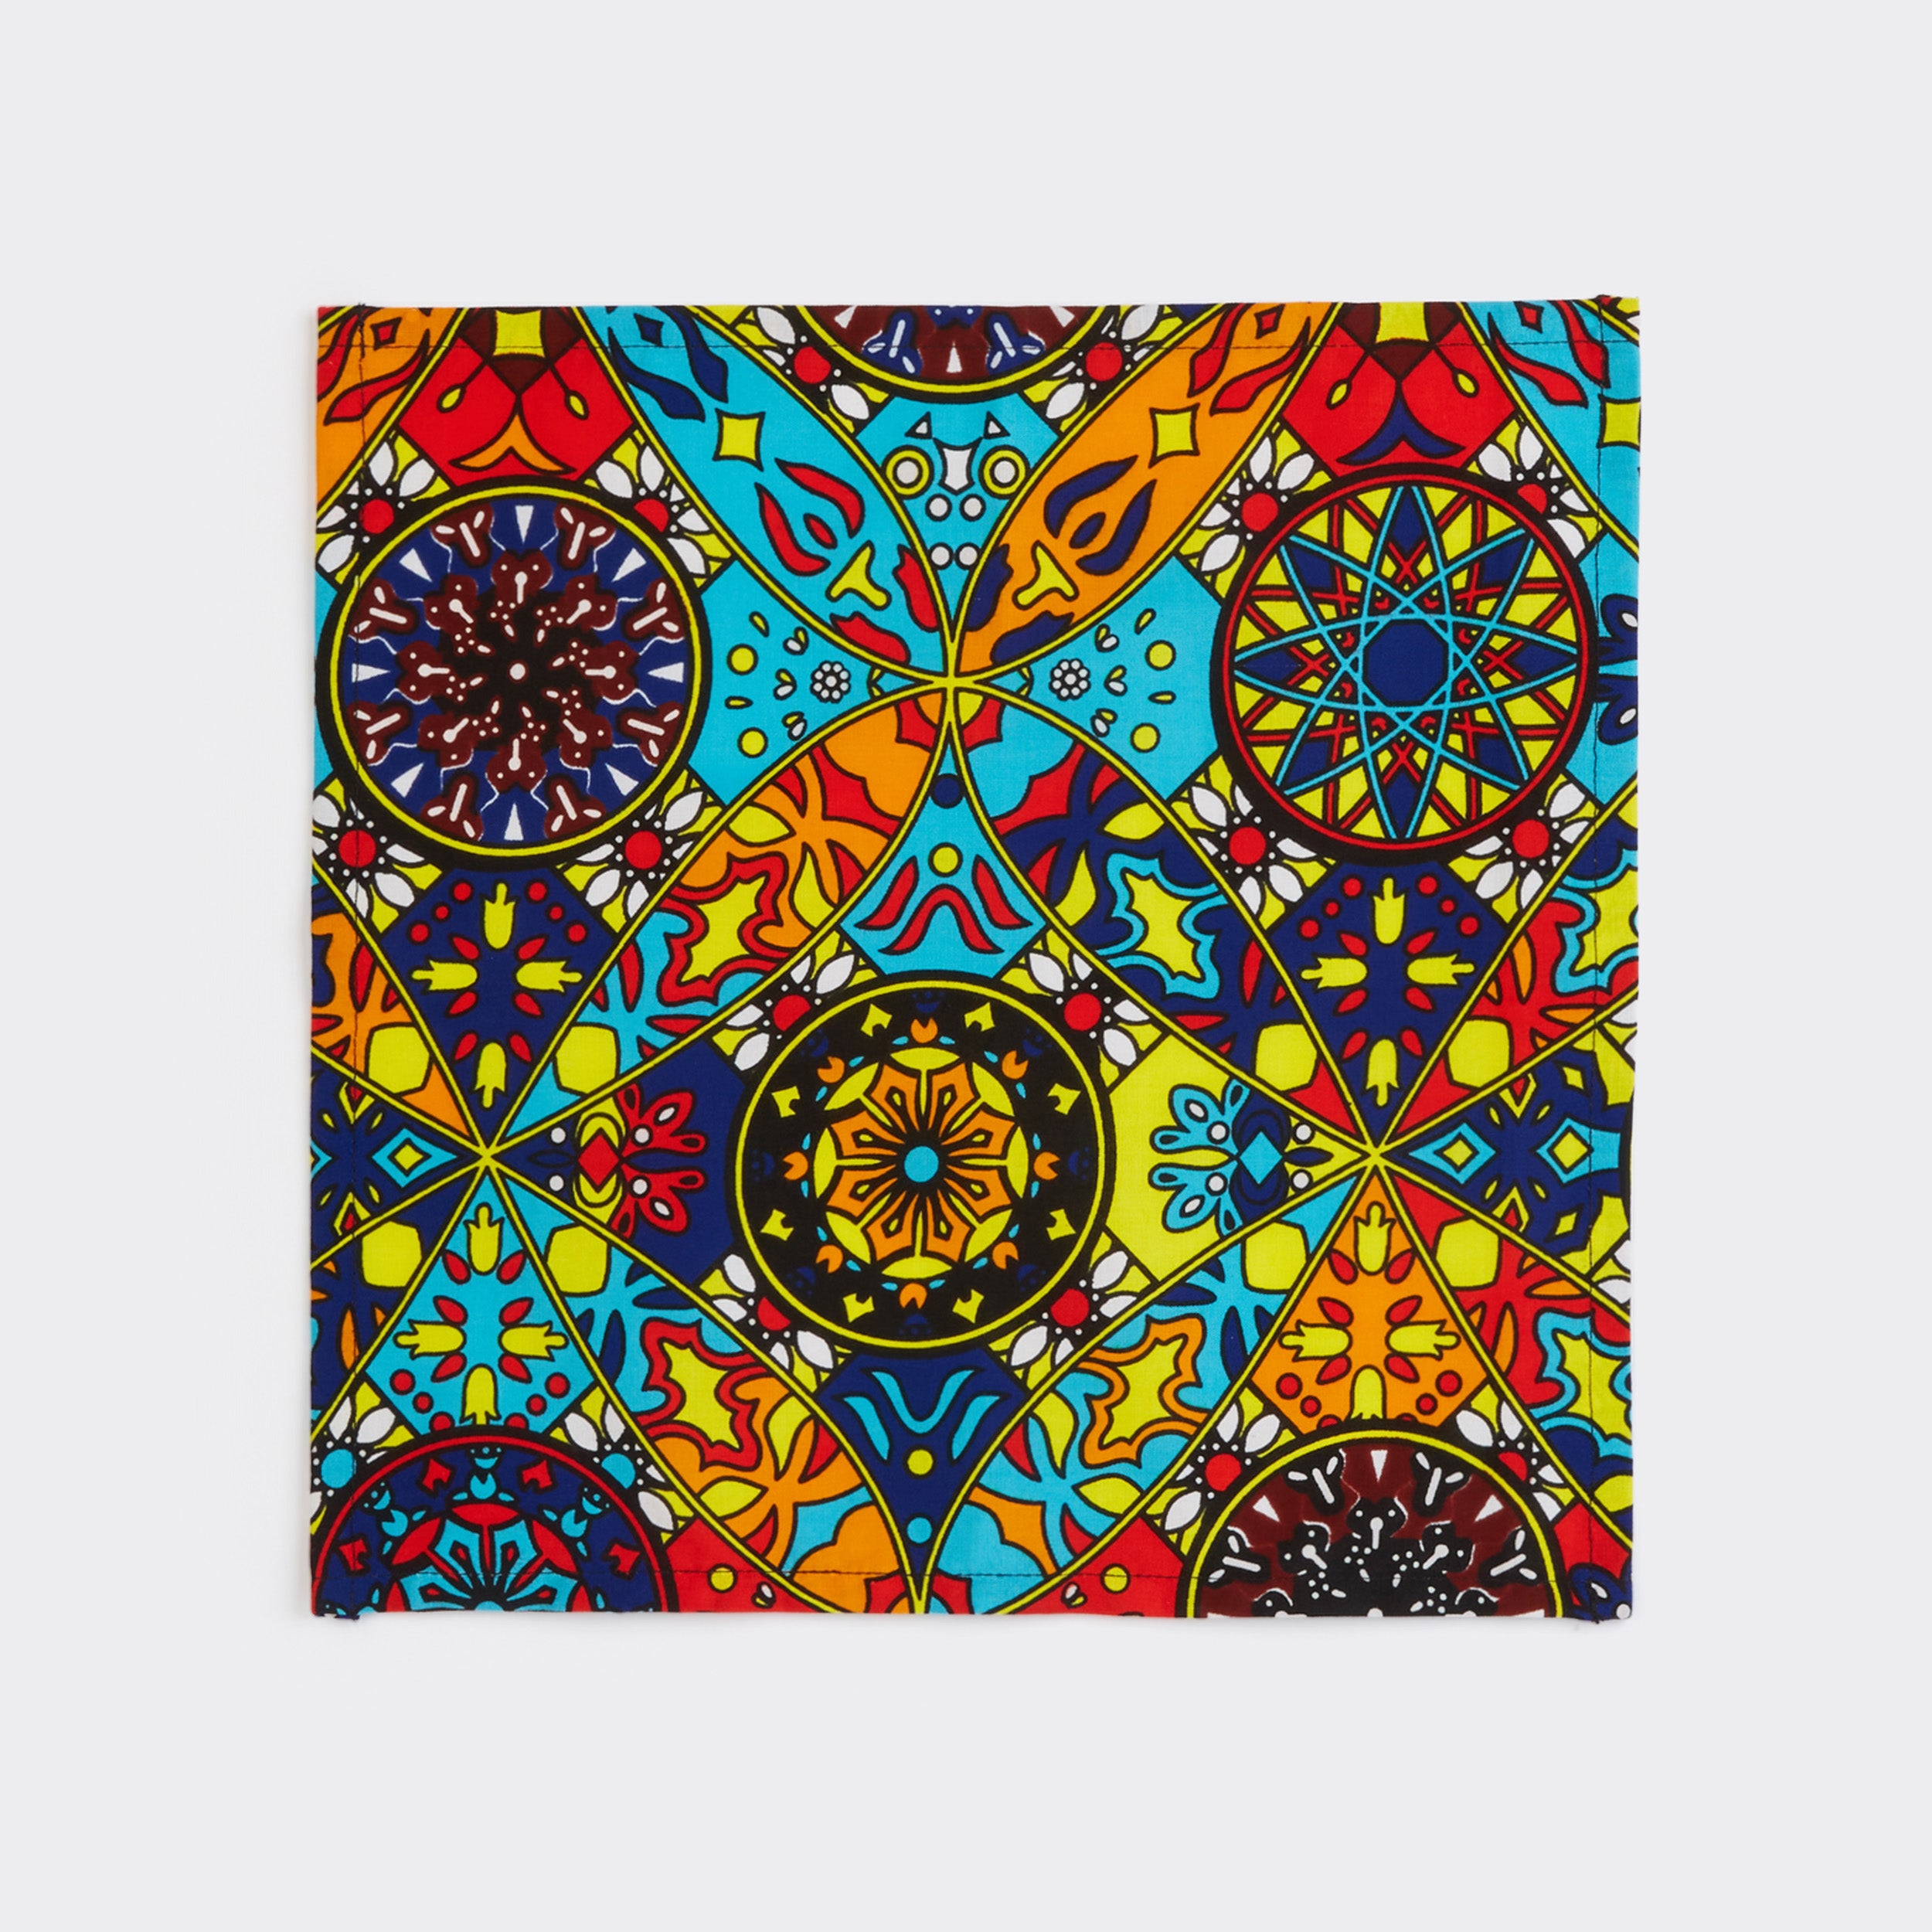 Still life: Pair of Napkins in Wax Circus Fantasy Circus Fantasy with colors blue, yellow, and orange.